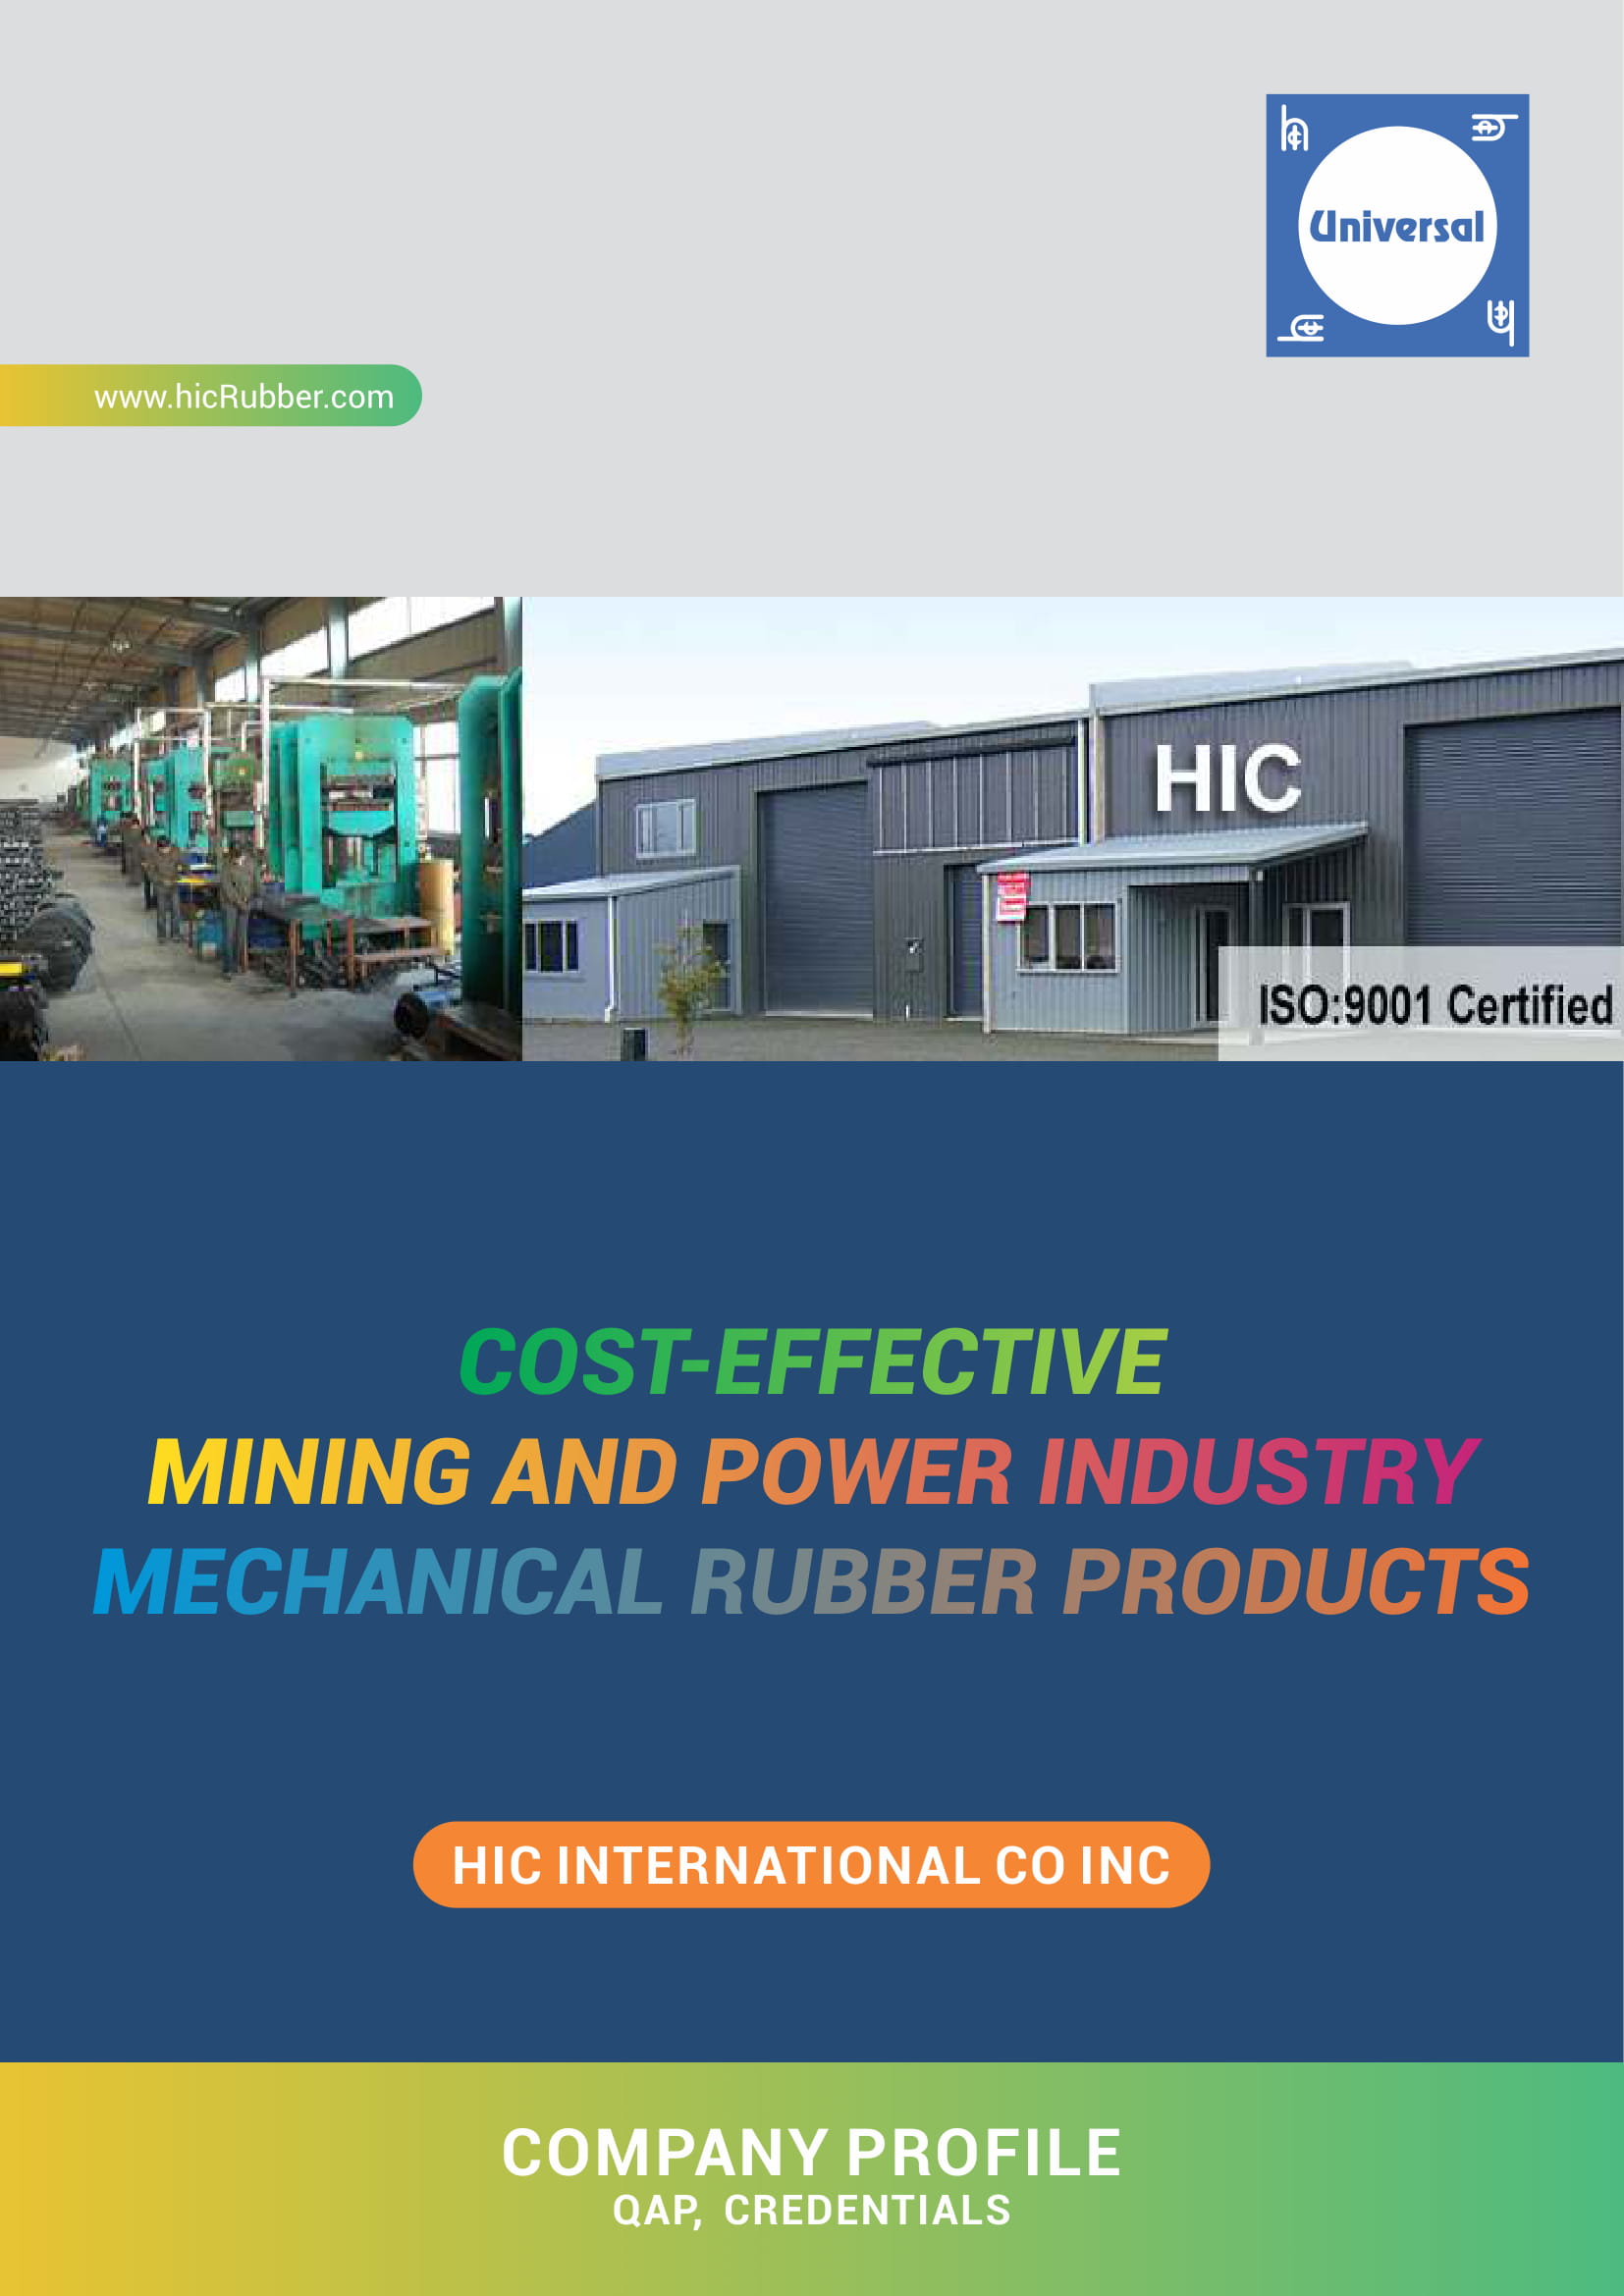 co profile hic mechanical rubber products credentials mining power industries